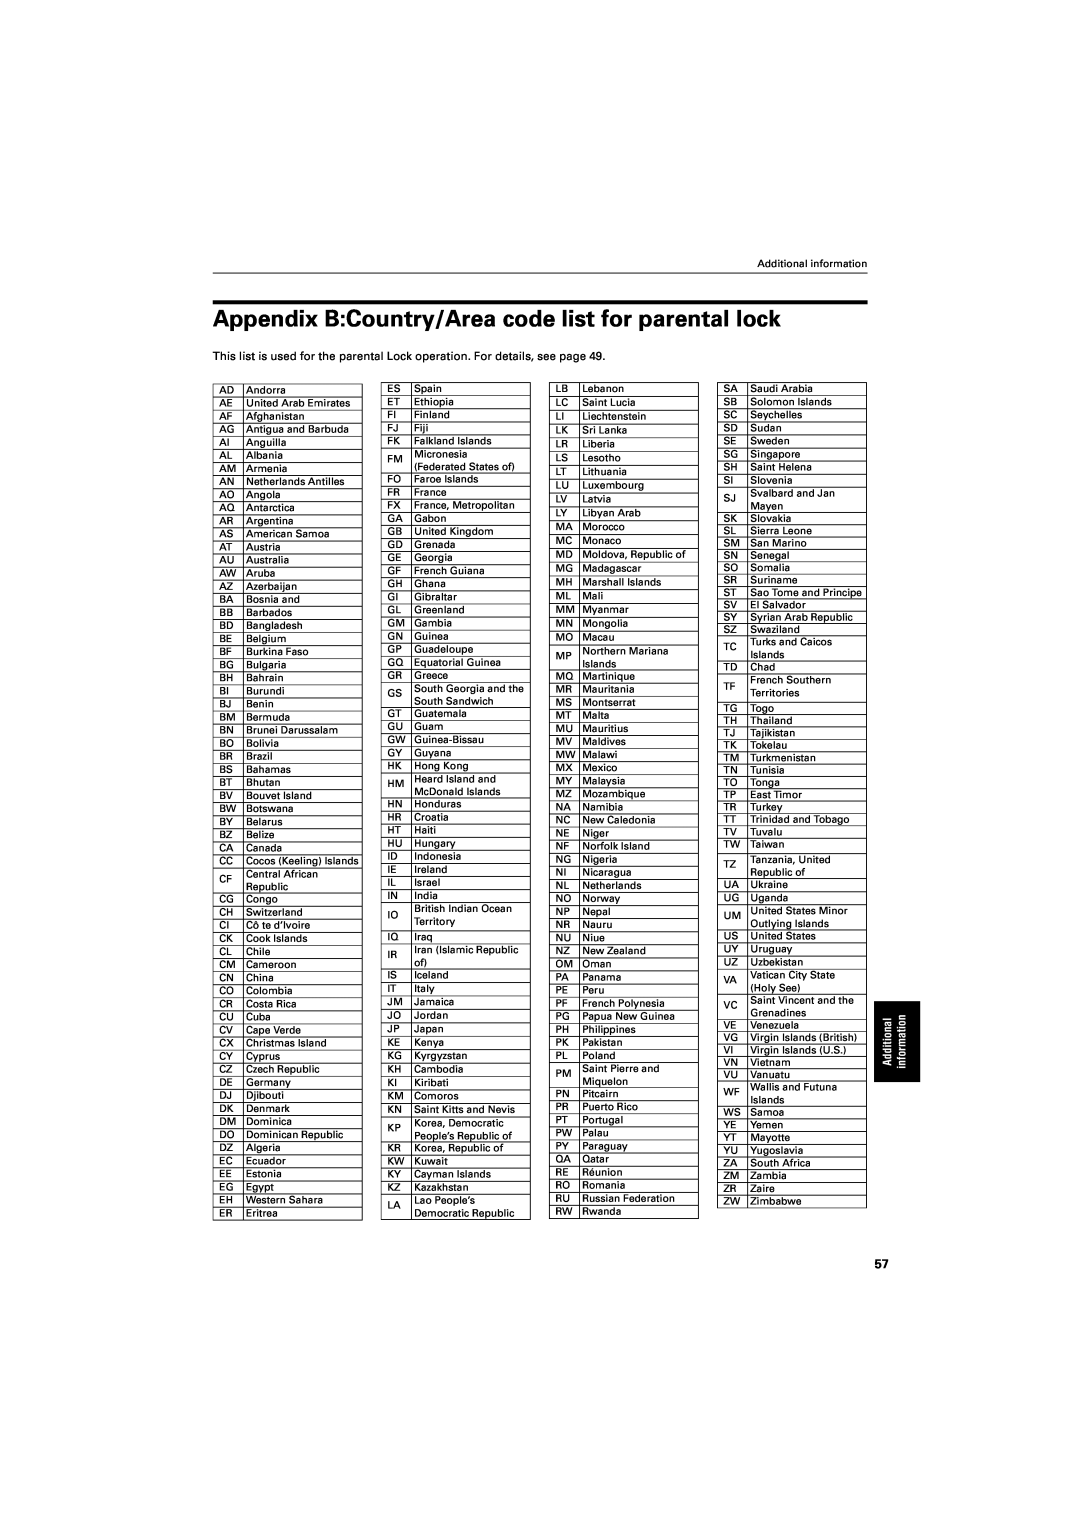 JVC GNT0013-014A manual Appendix BCountry/Area code list for parental lock, Additional, information 